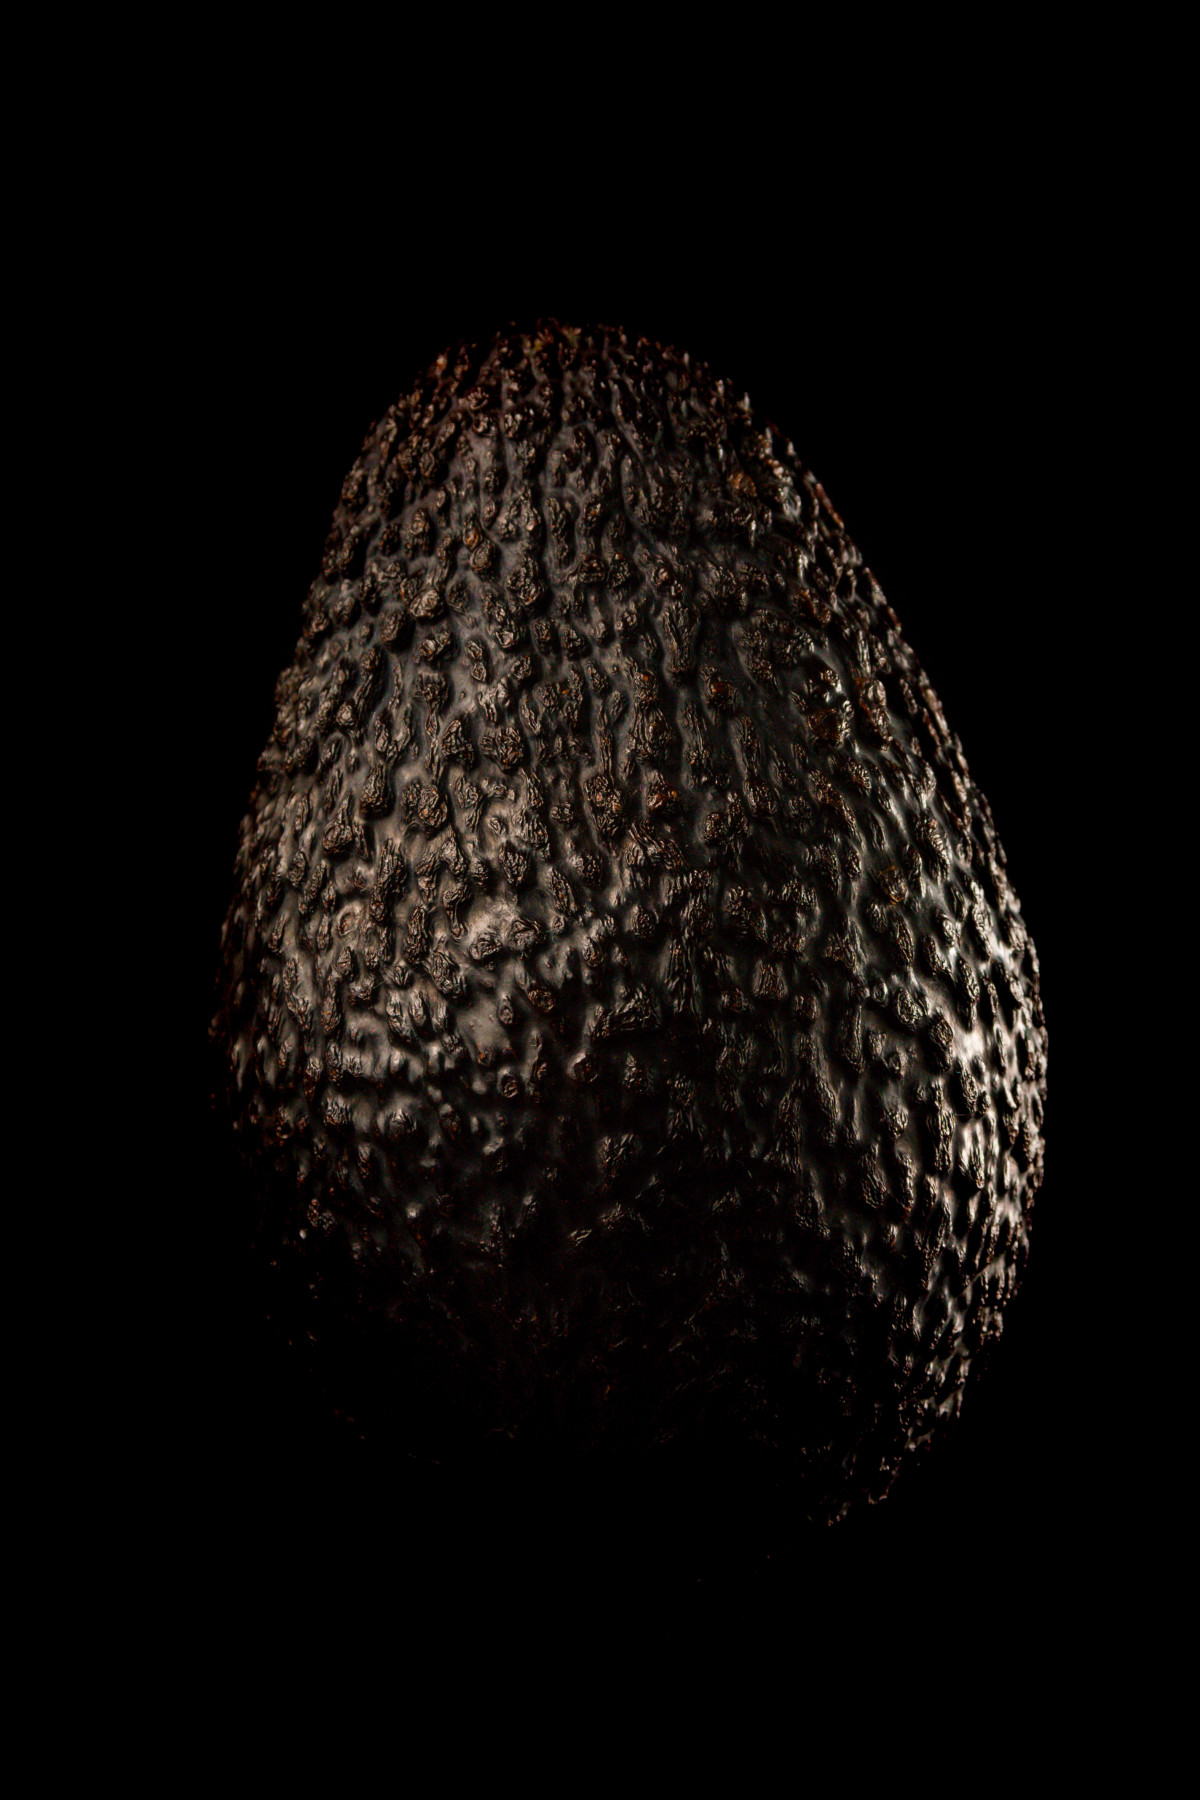 Portrait of the darkside of the avocado